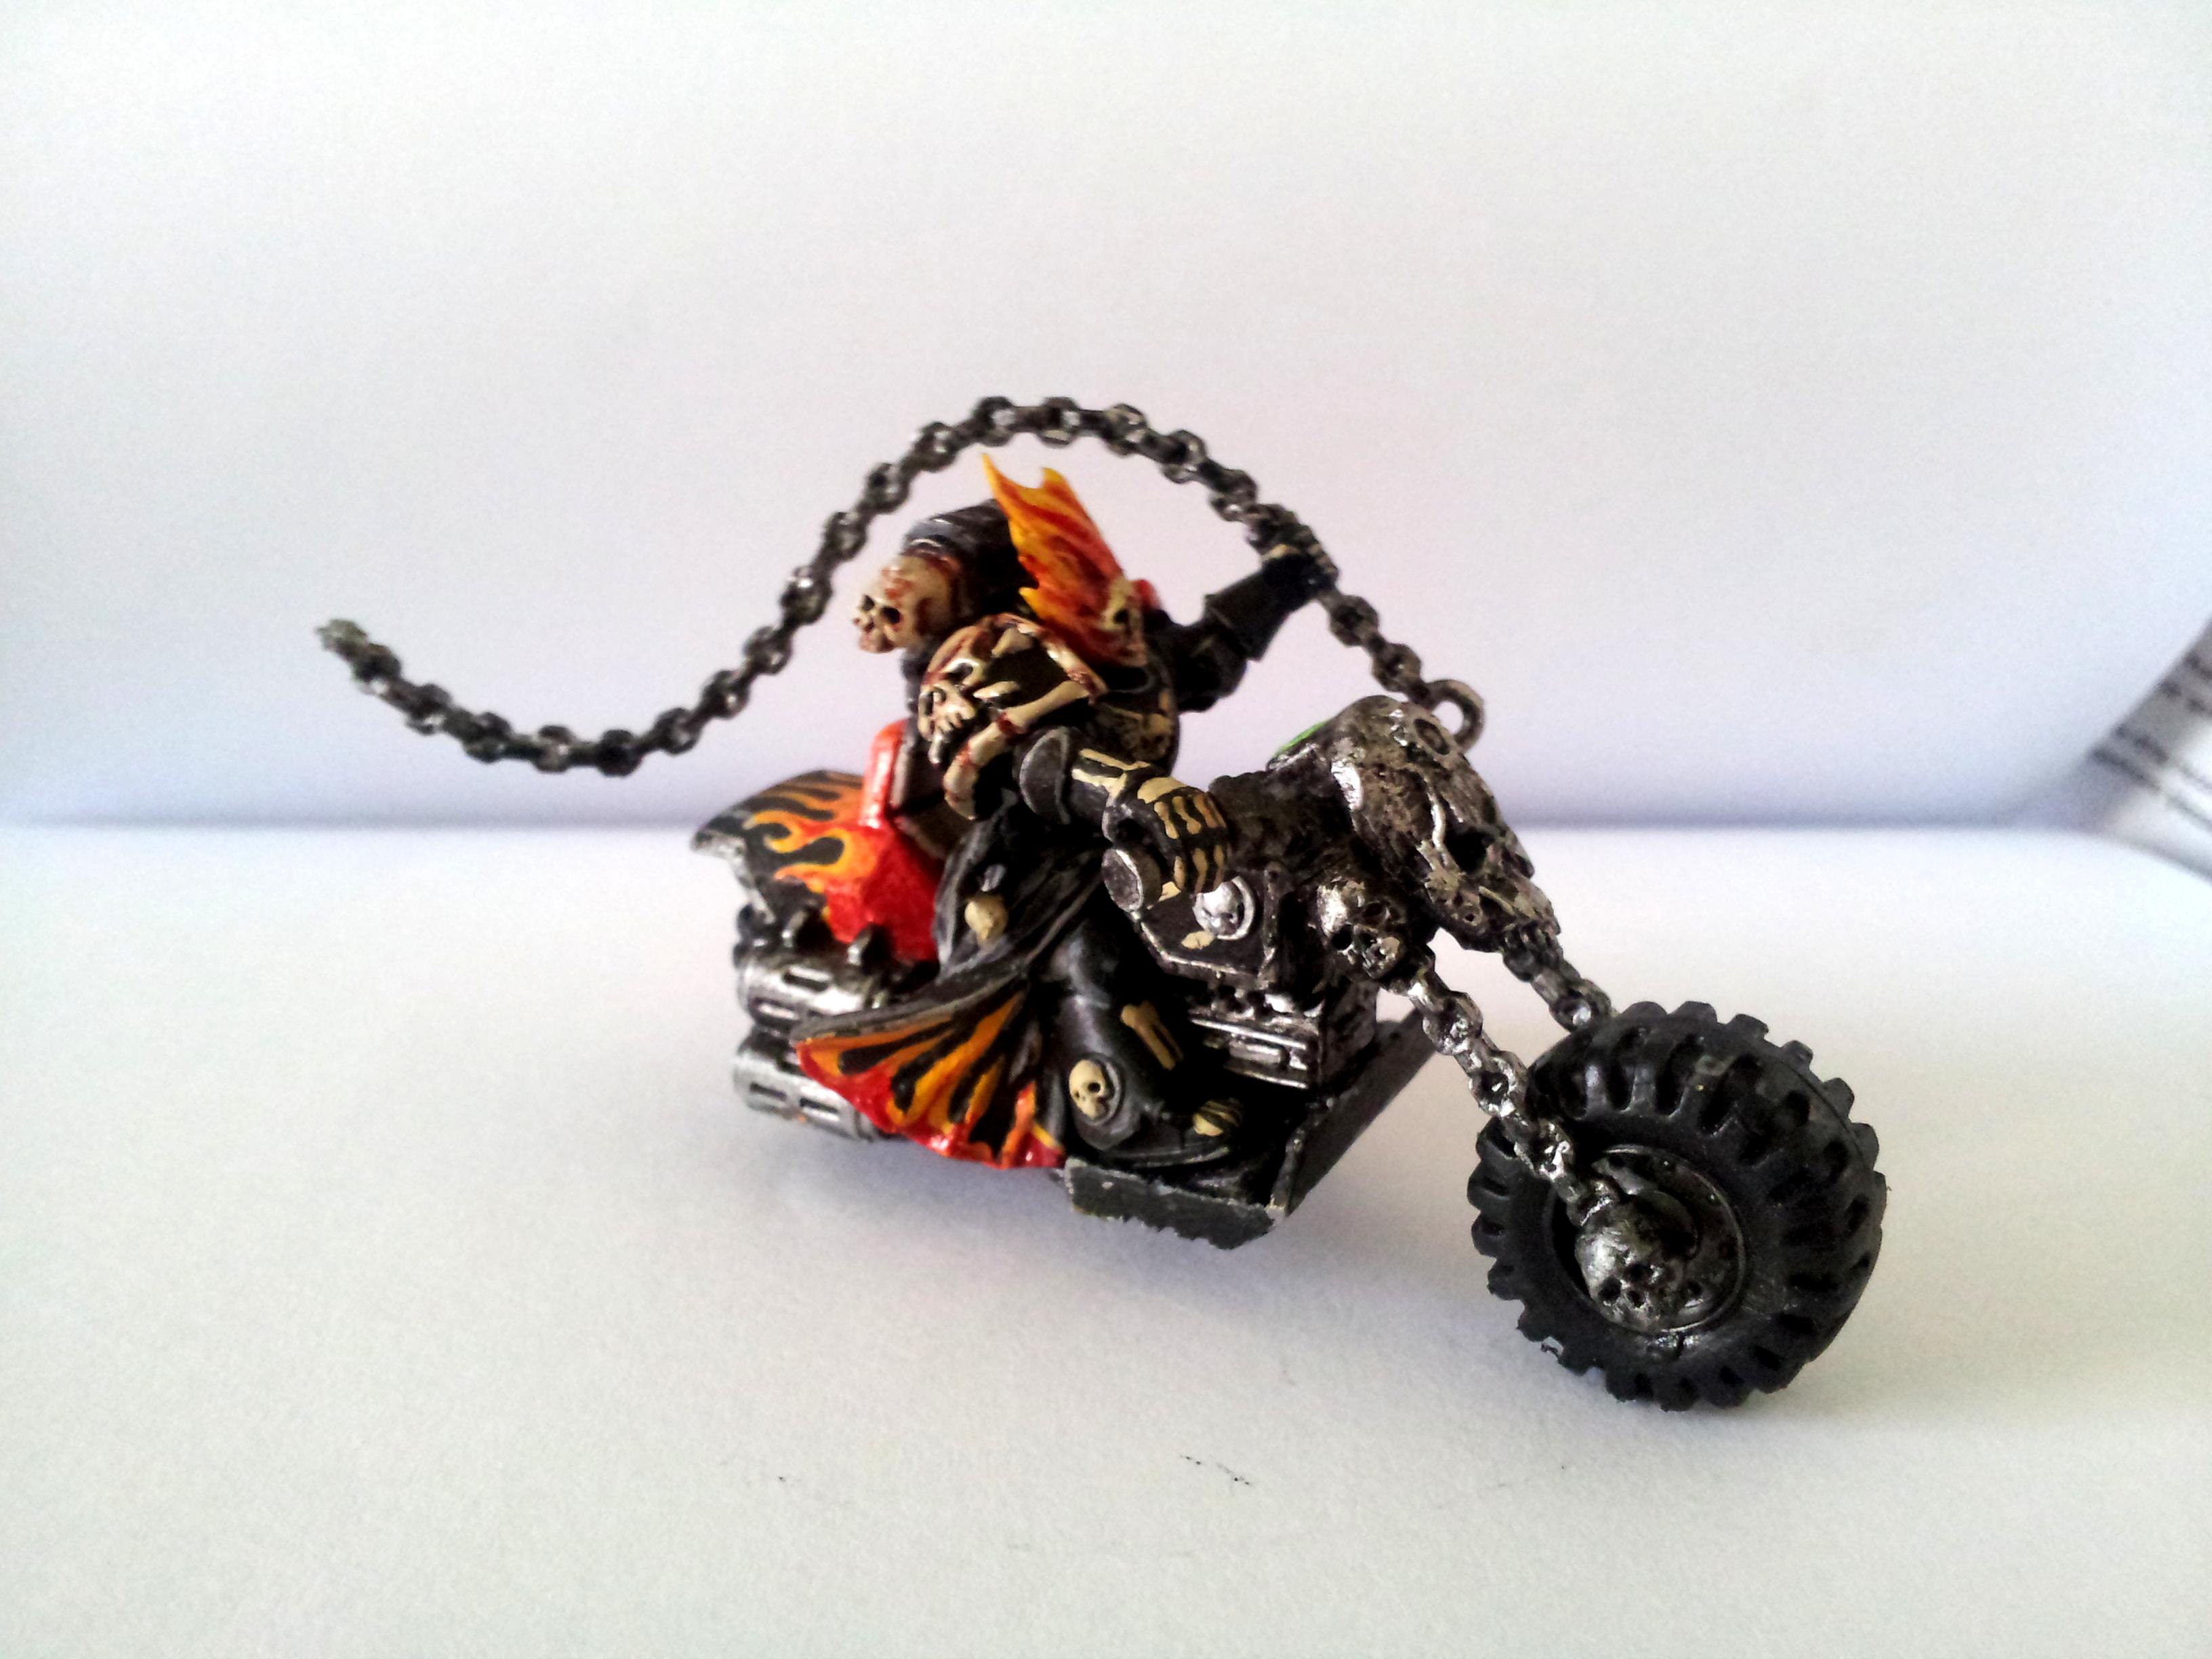 Bike, Conversion, Ghost Rider, Legion Of The Damned, Space Marines, Warhammer 40,000